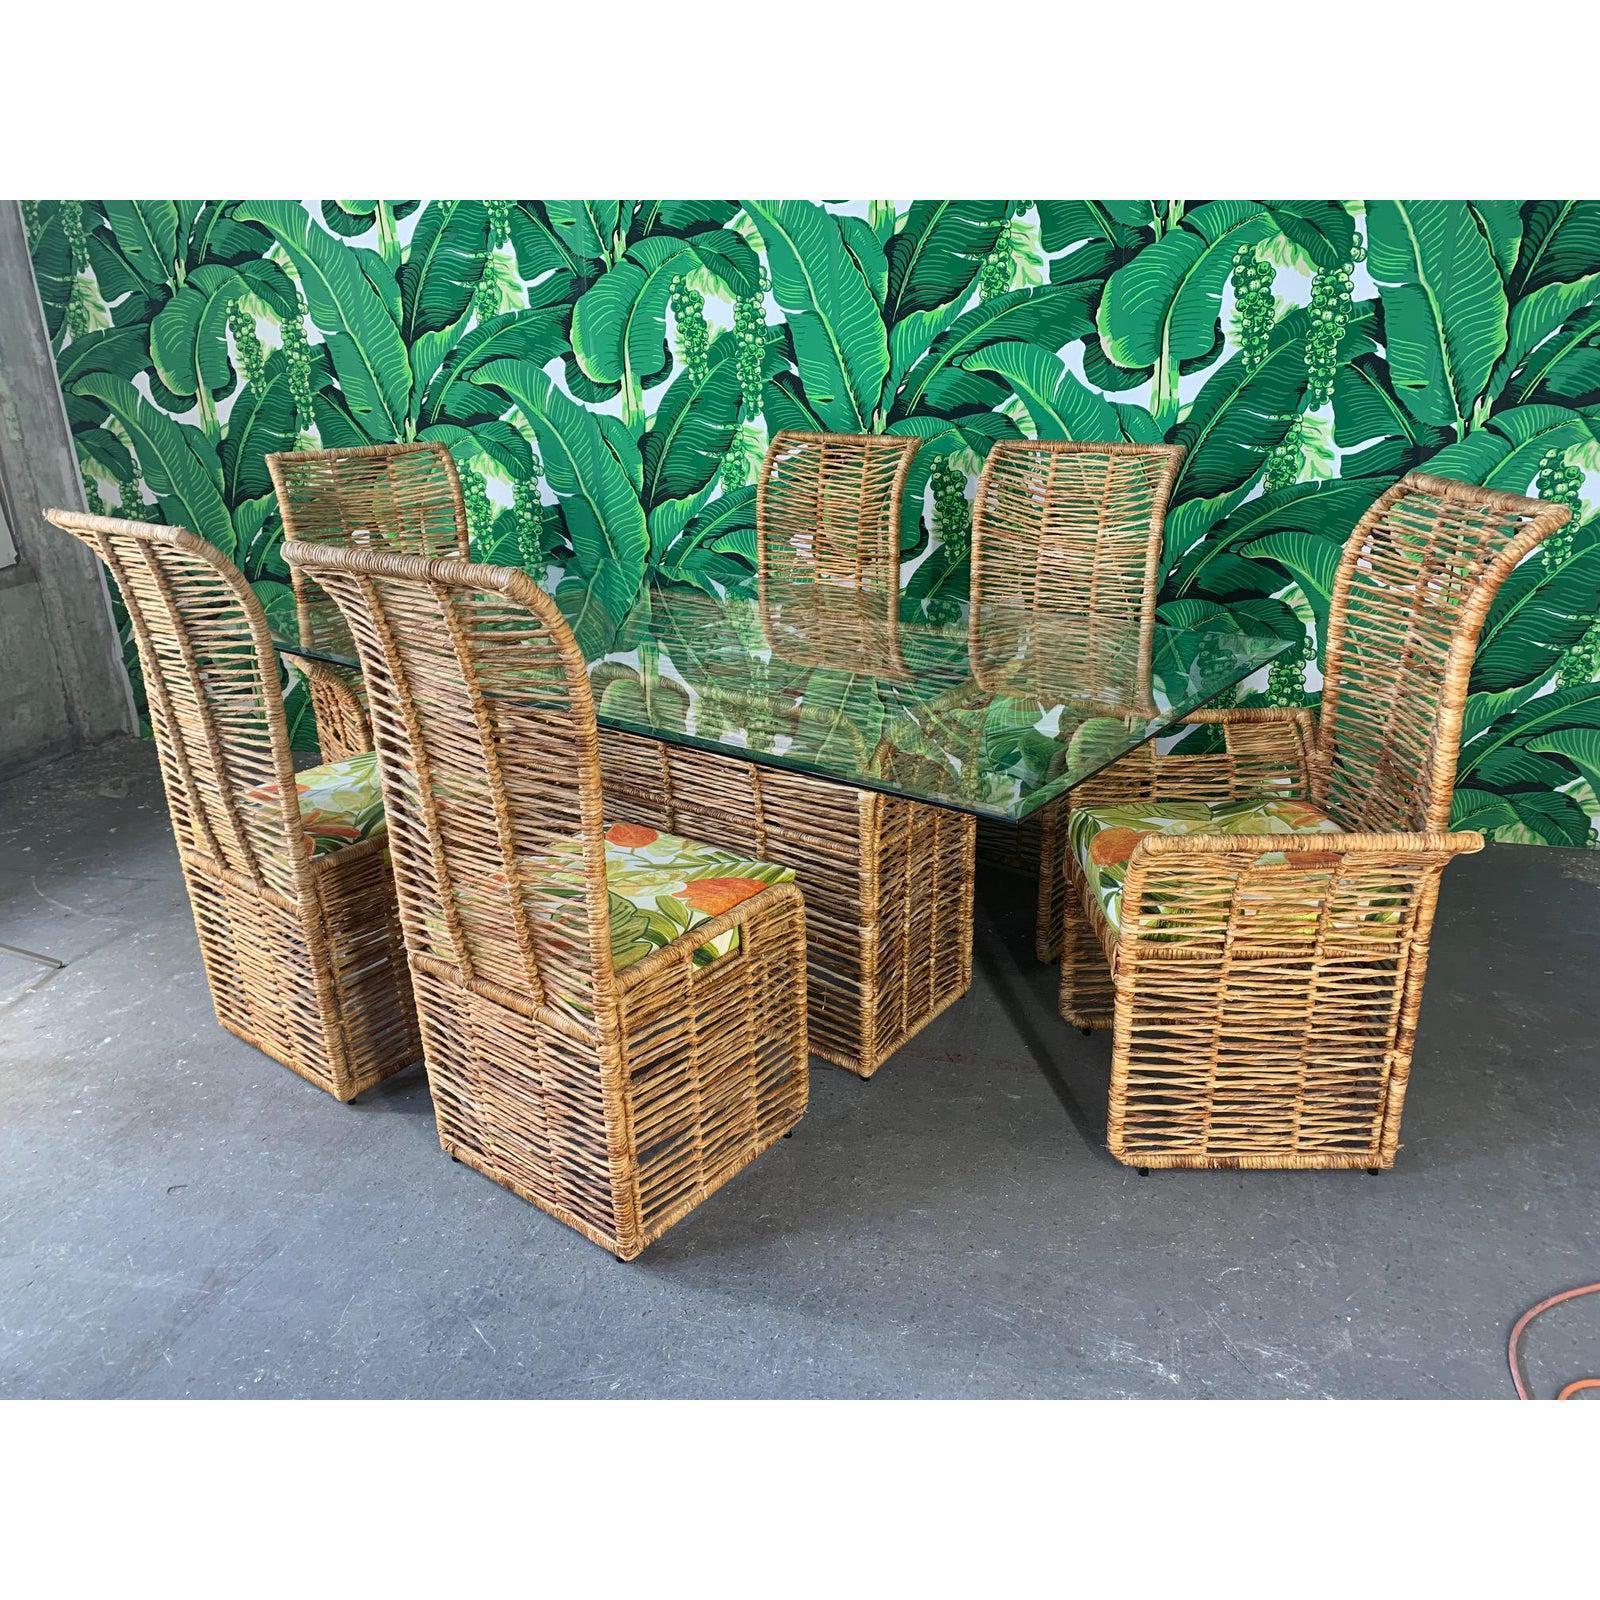 Unique dining set consists of 6 rattan rope wrapped dining chairs upholstered in a tropical palm leaf print and matching pedestal table with glass top. Steel frame construction, heavy and sturdy. Two arm chairs and four side chairs. Good vintage